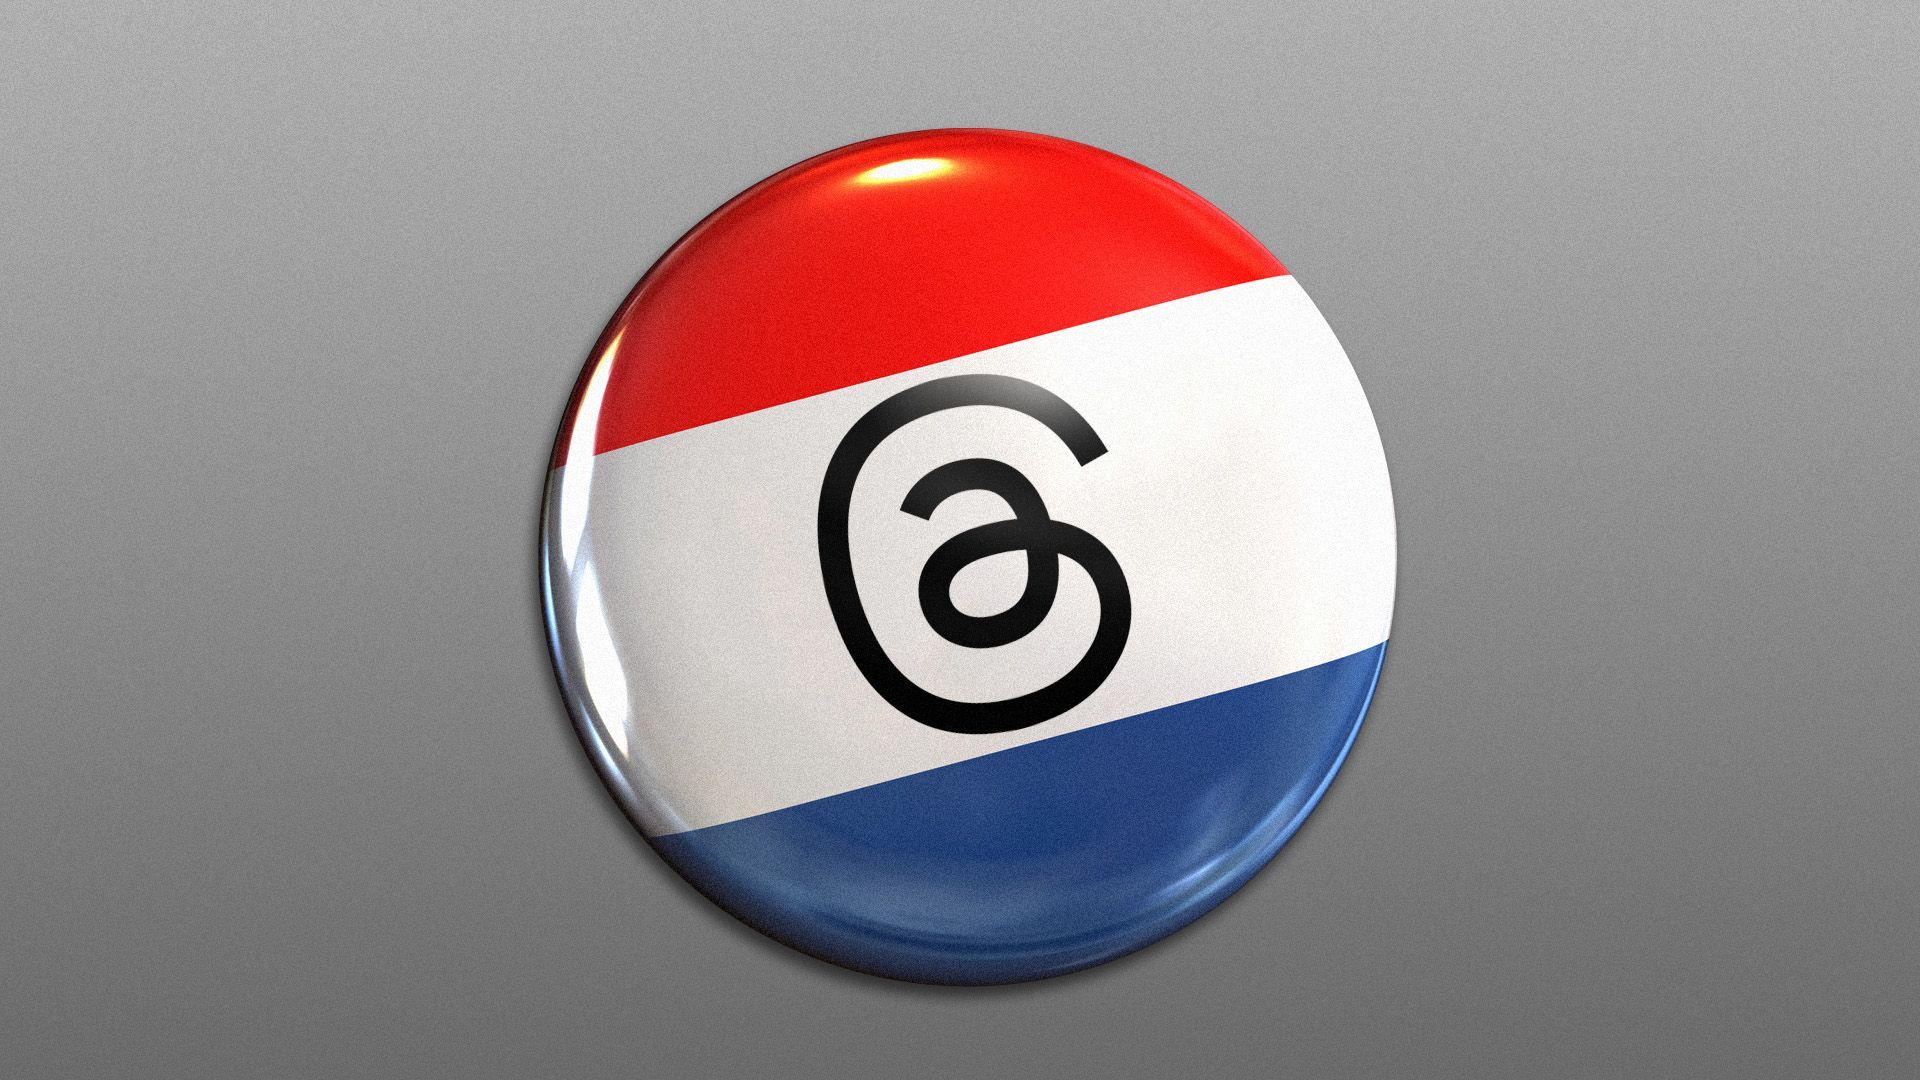 Illustration of an election button with the threads logo